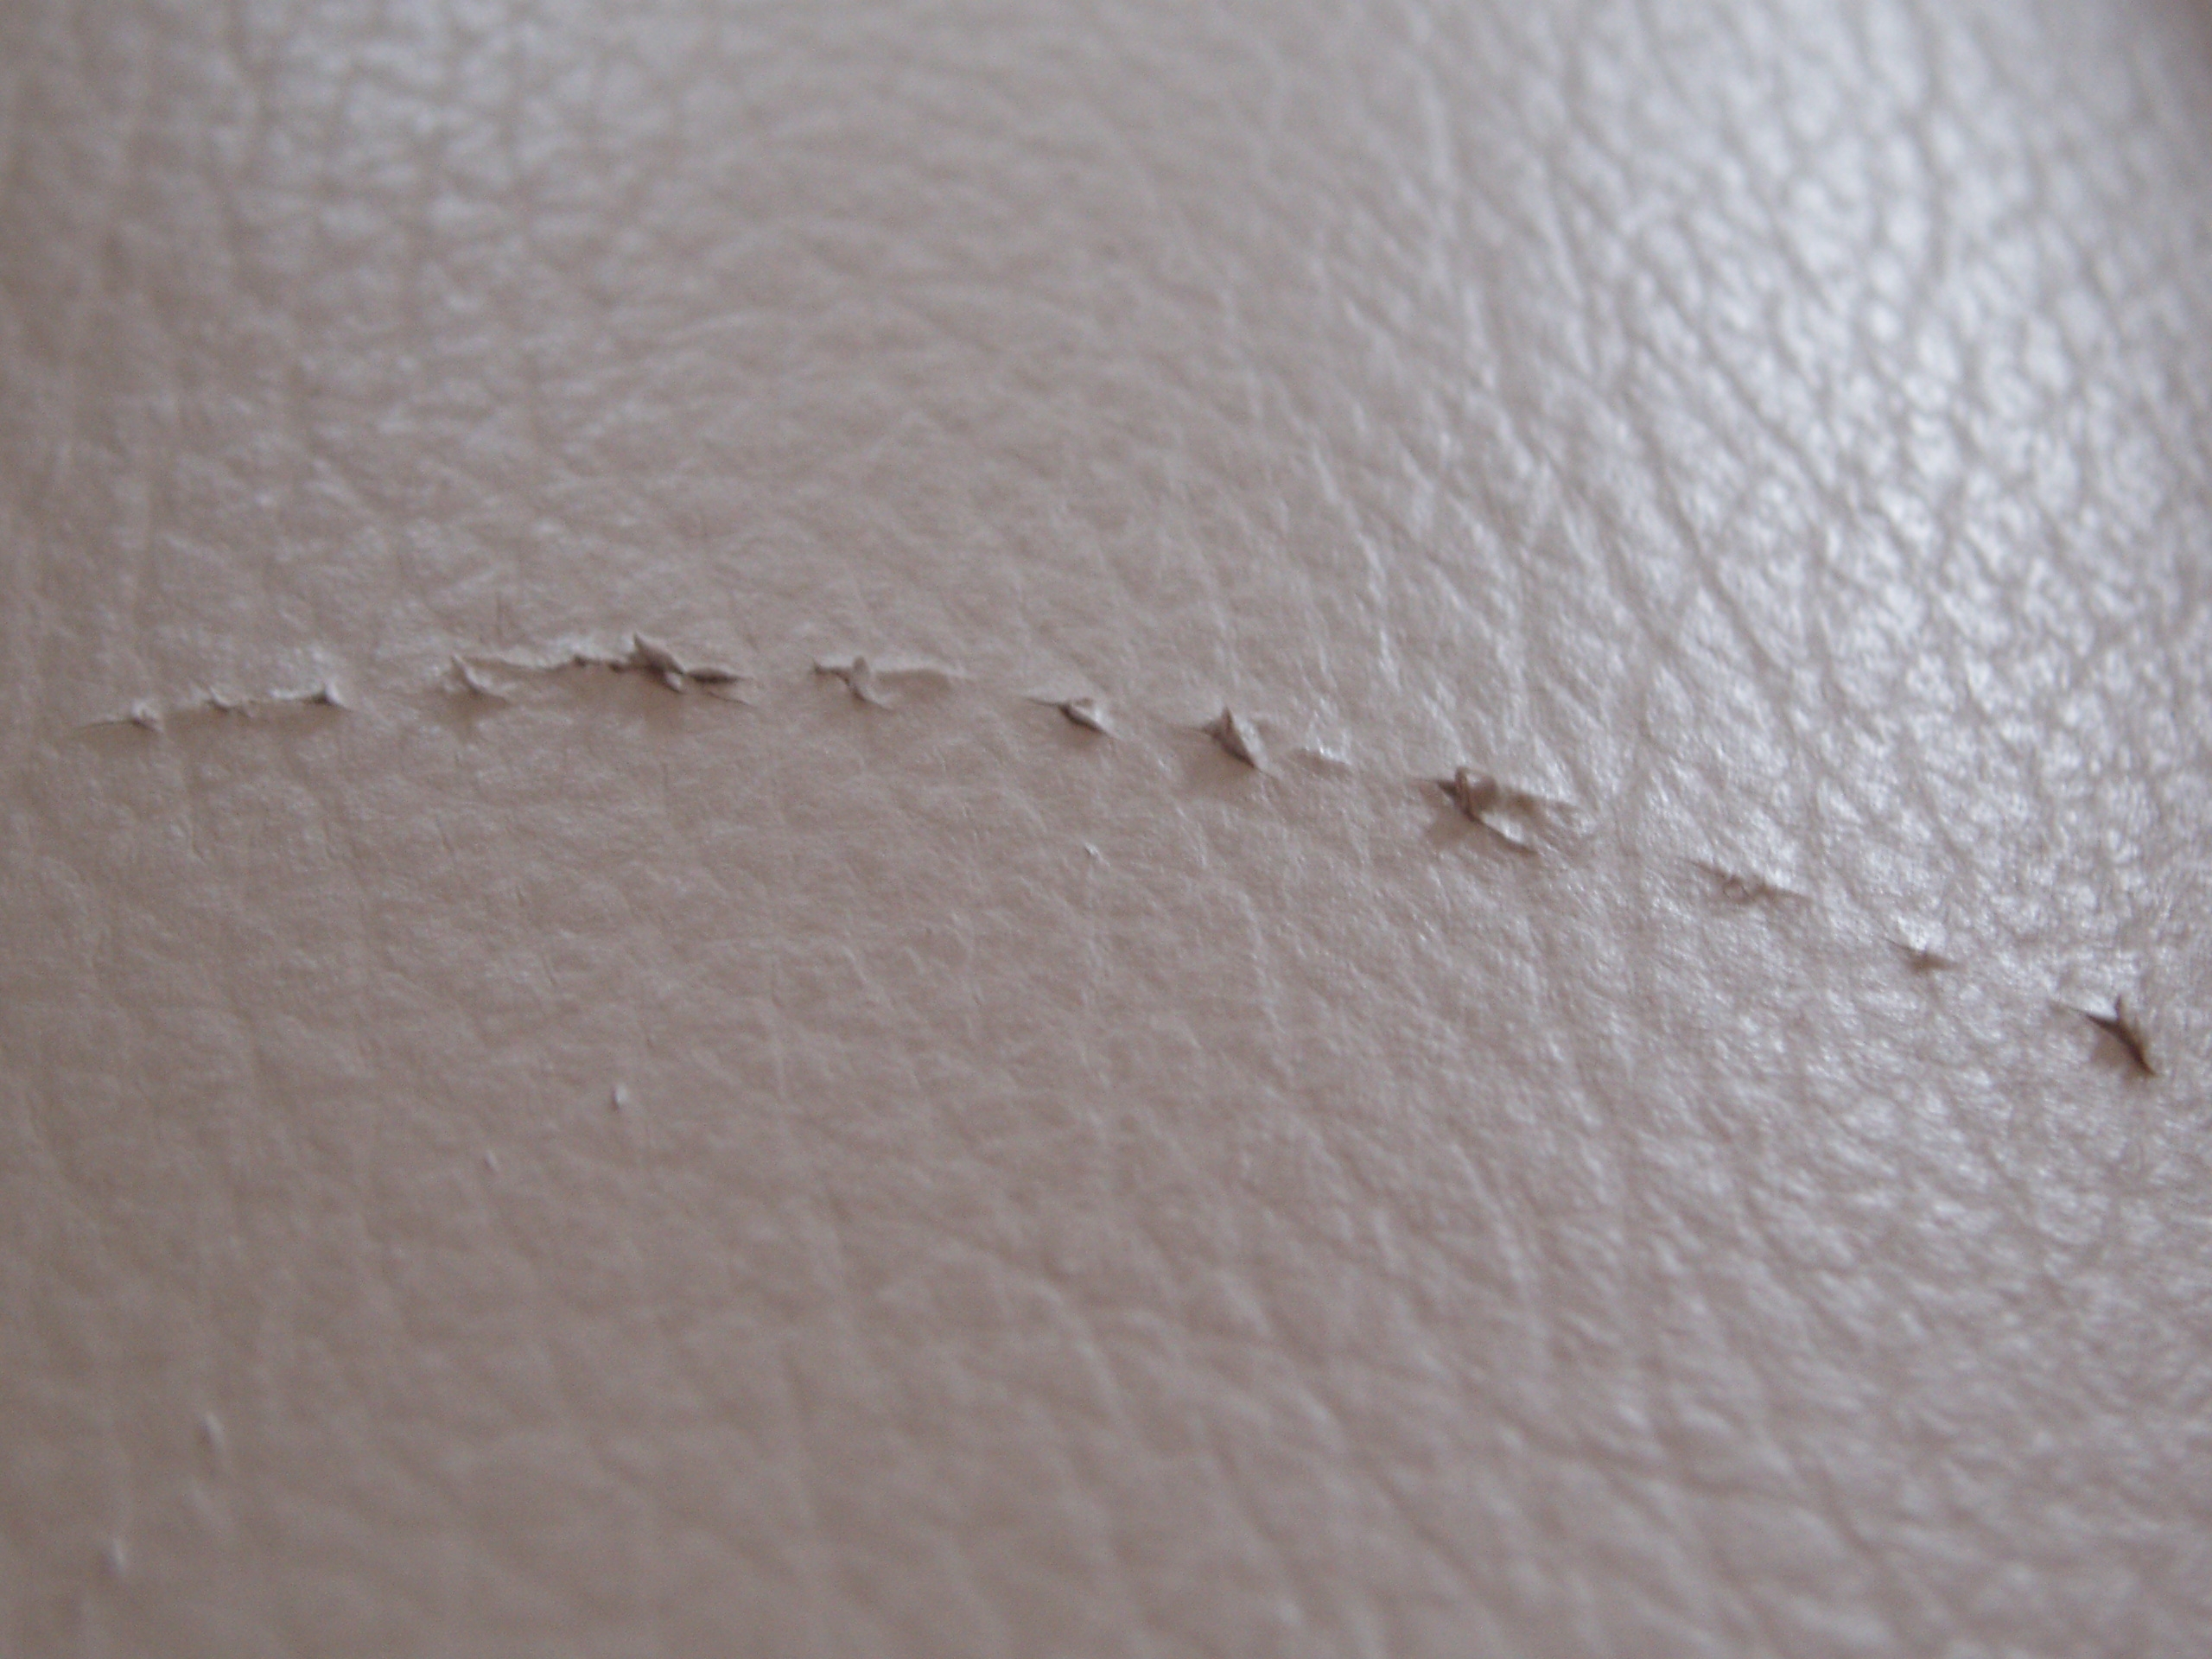 How To Repair Cat Scratches On Leather, How To Repair Leather Furniture Cat Scratches